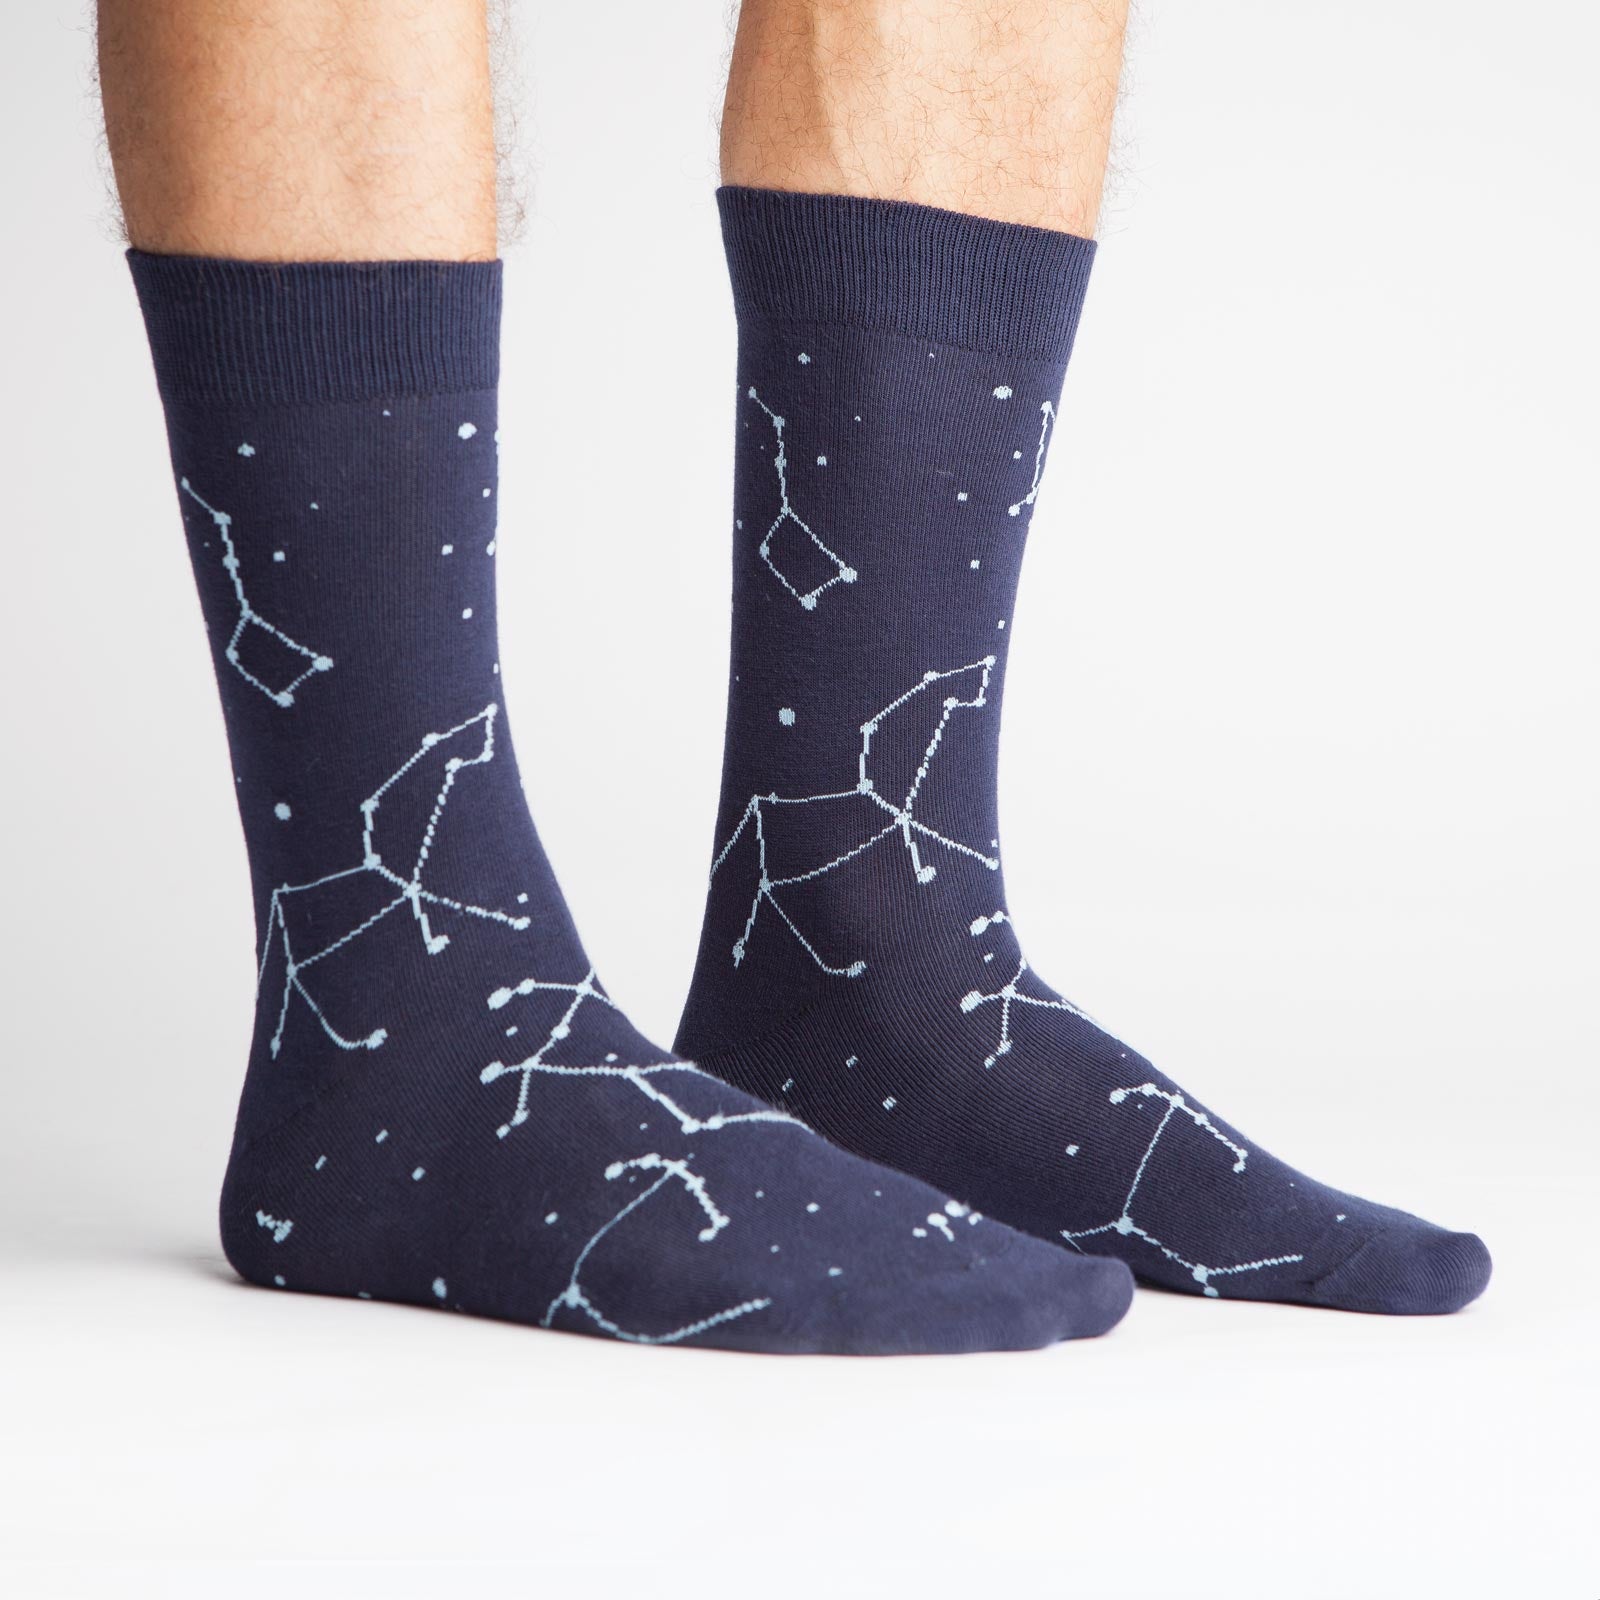 Sock It To Me Constellation (GLOWS IN THE DARK!) men's navy blue sock featuring constellations all over worn by model from side